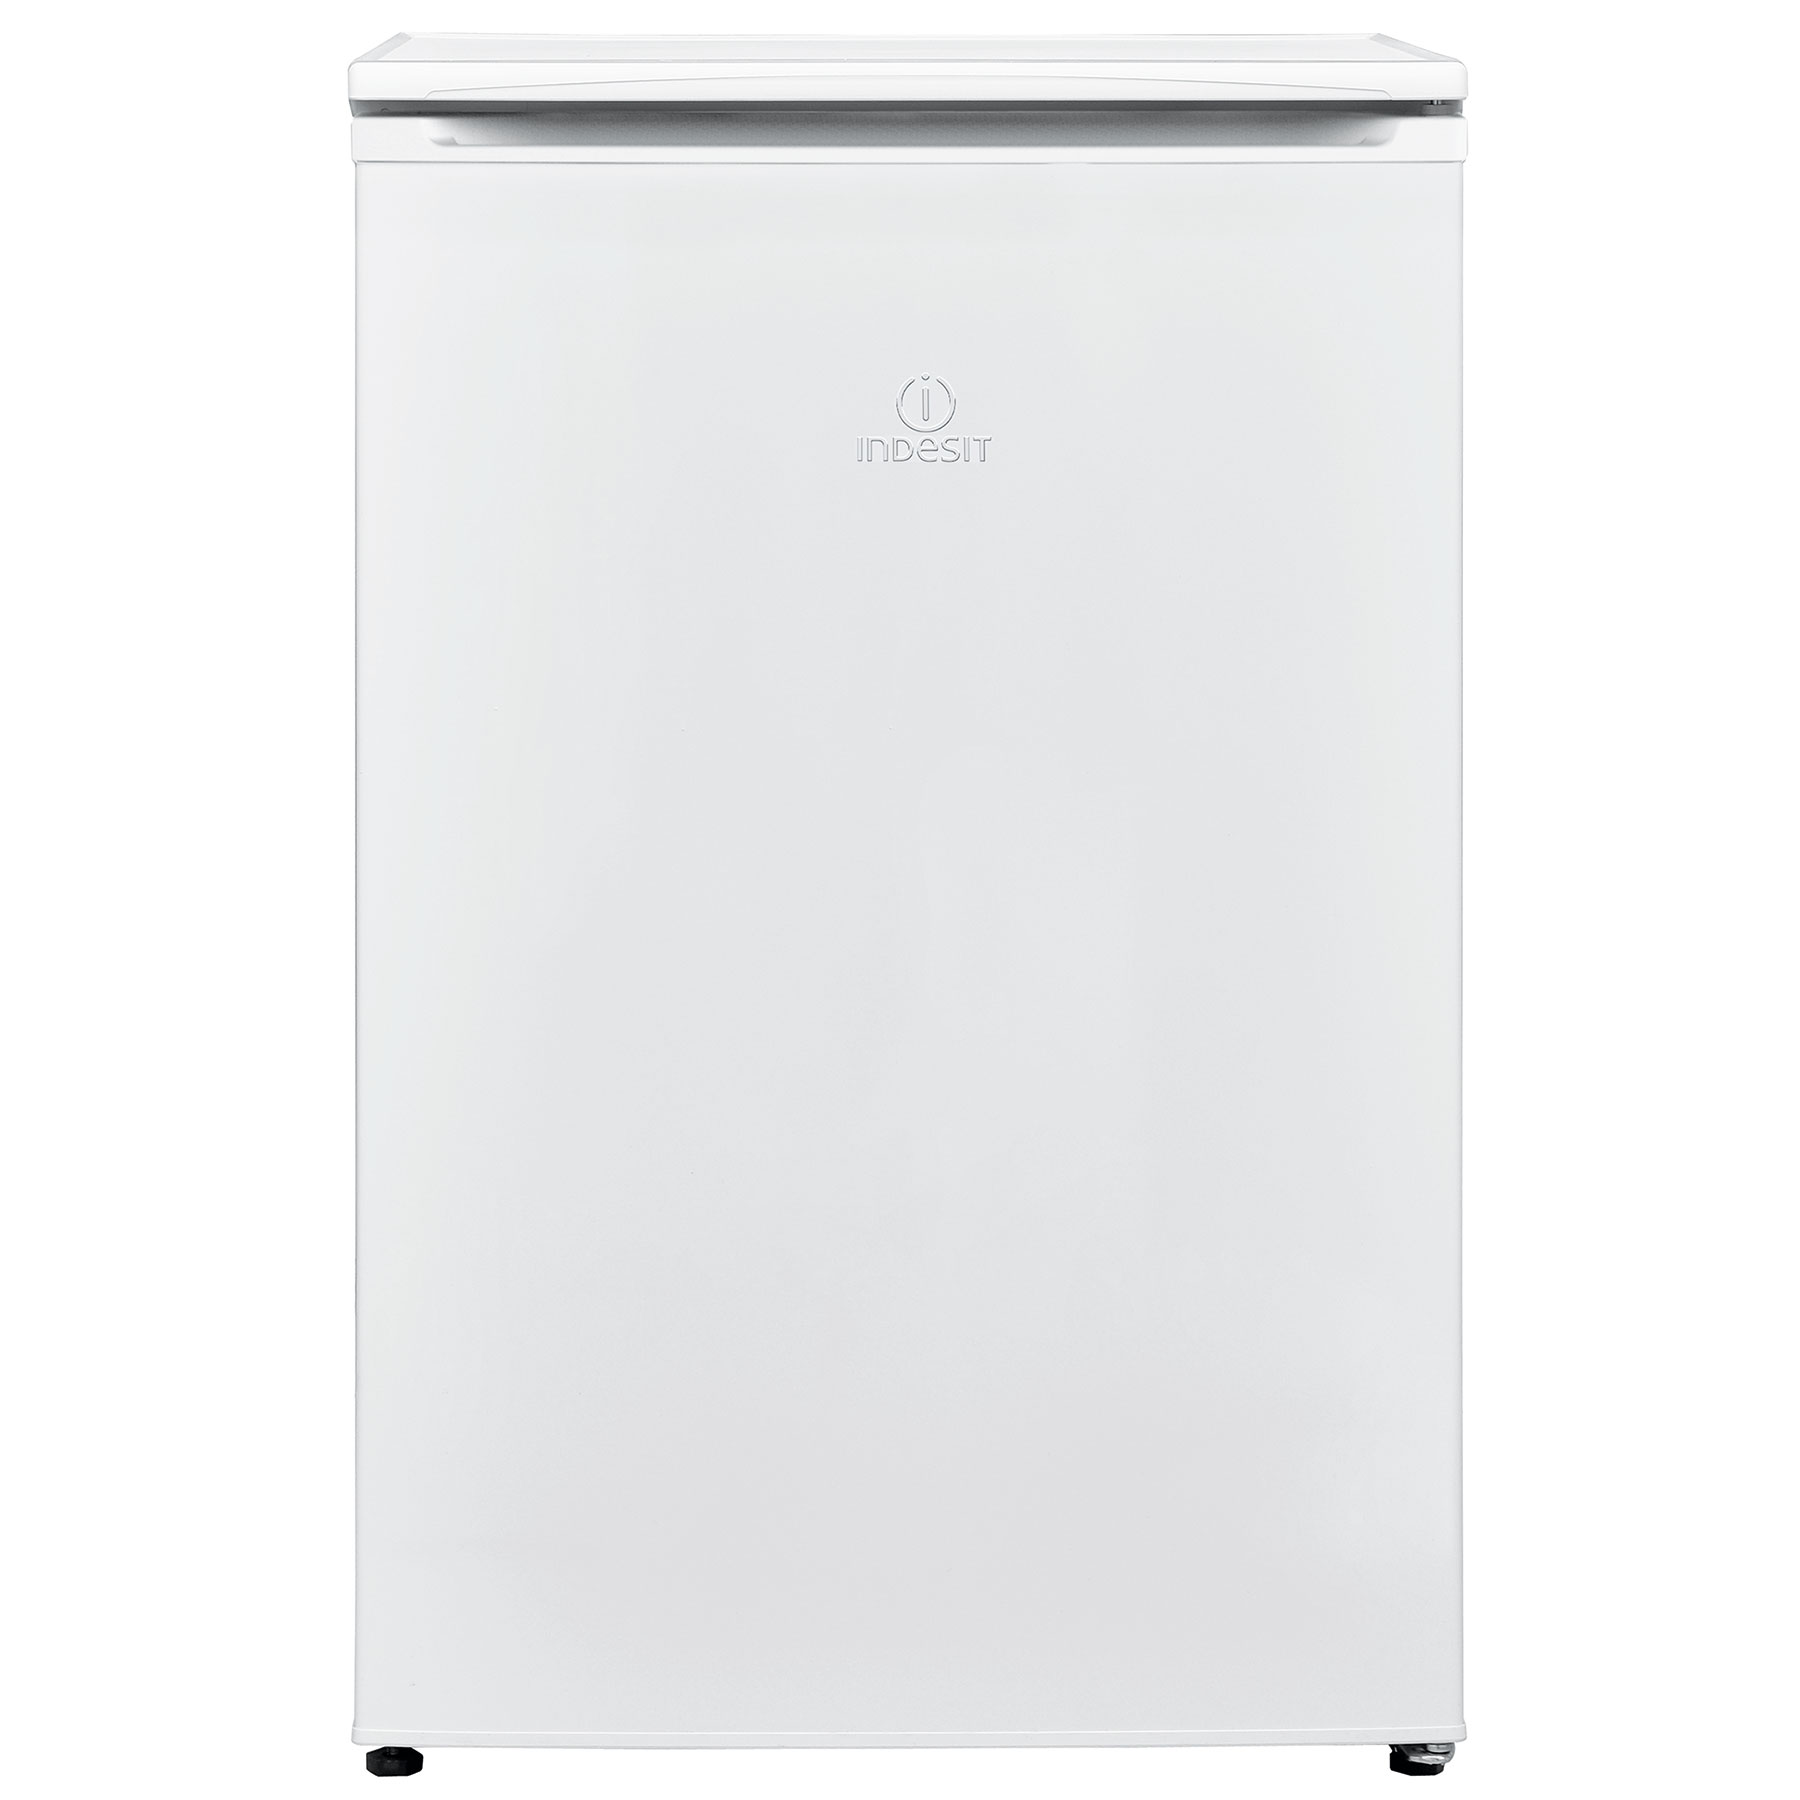 indesit i55zm1120w 55cm undercounter freezer in white e rated 103l